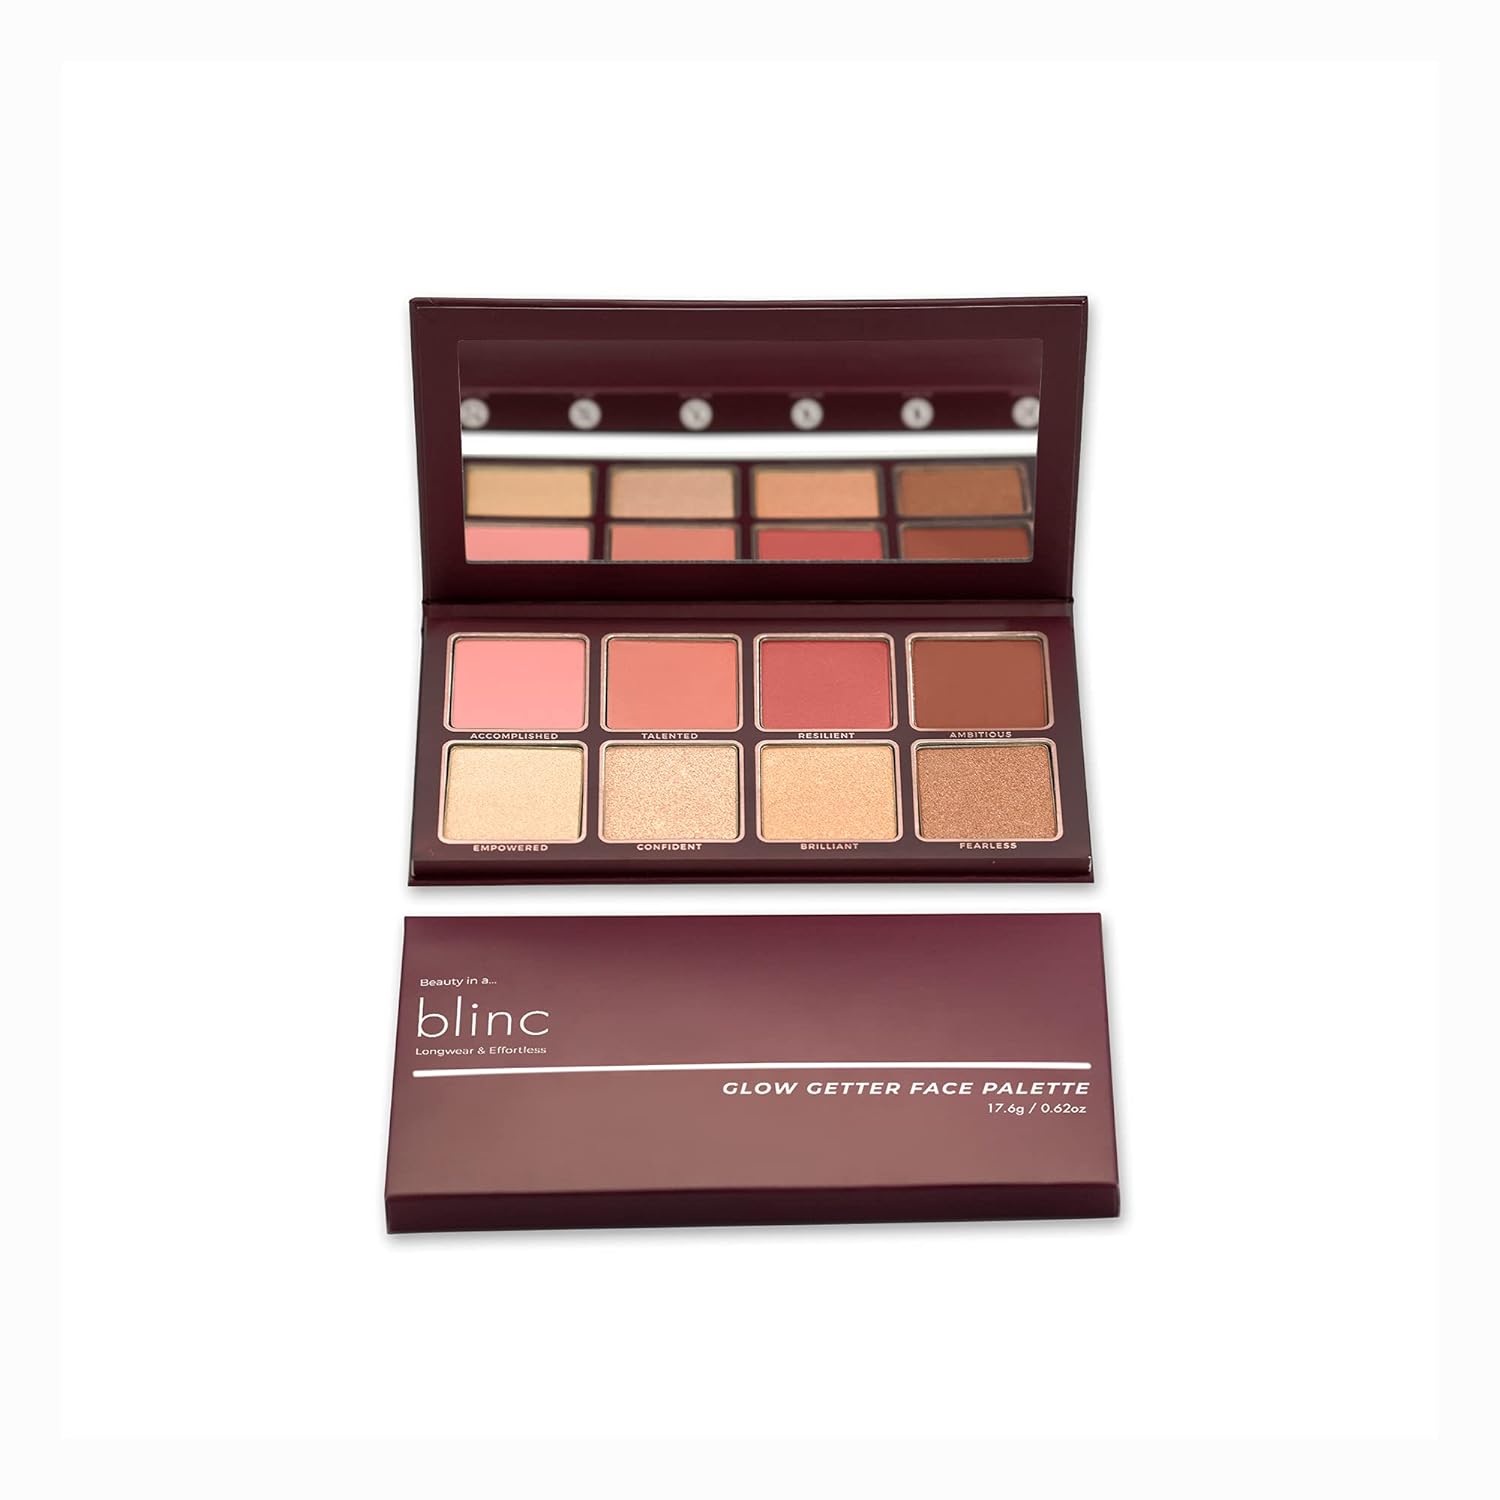 Blinc Glow Getter Face Palette, Cheek Palette with Highlighters and Blushes, Creamy, Blendable and Long-Lasting, 17.6g / 0.62